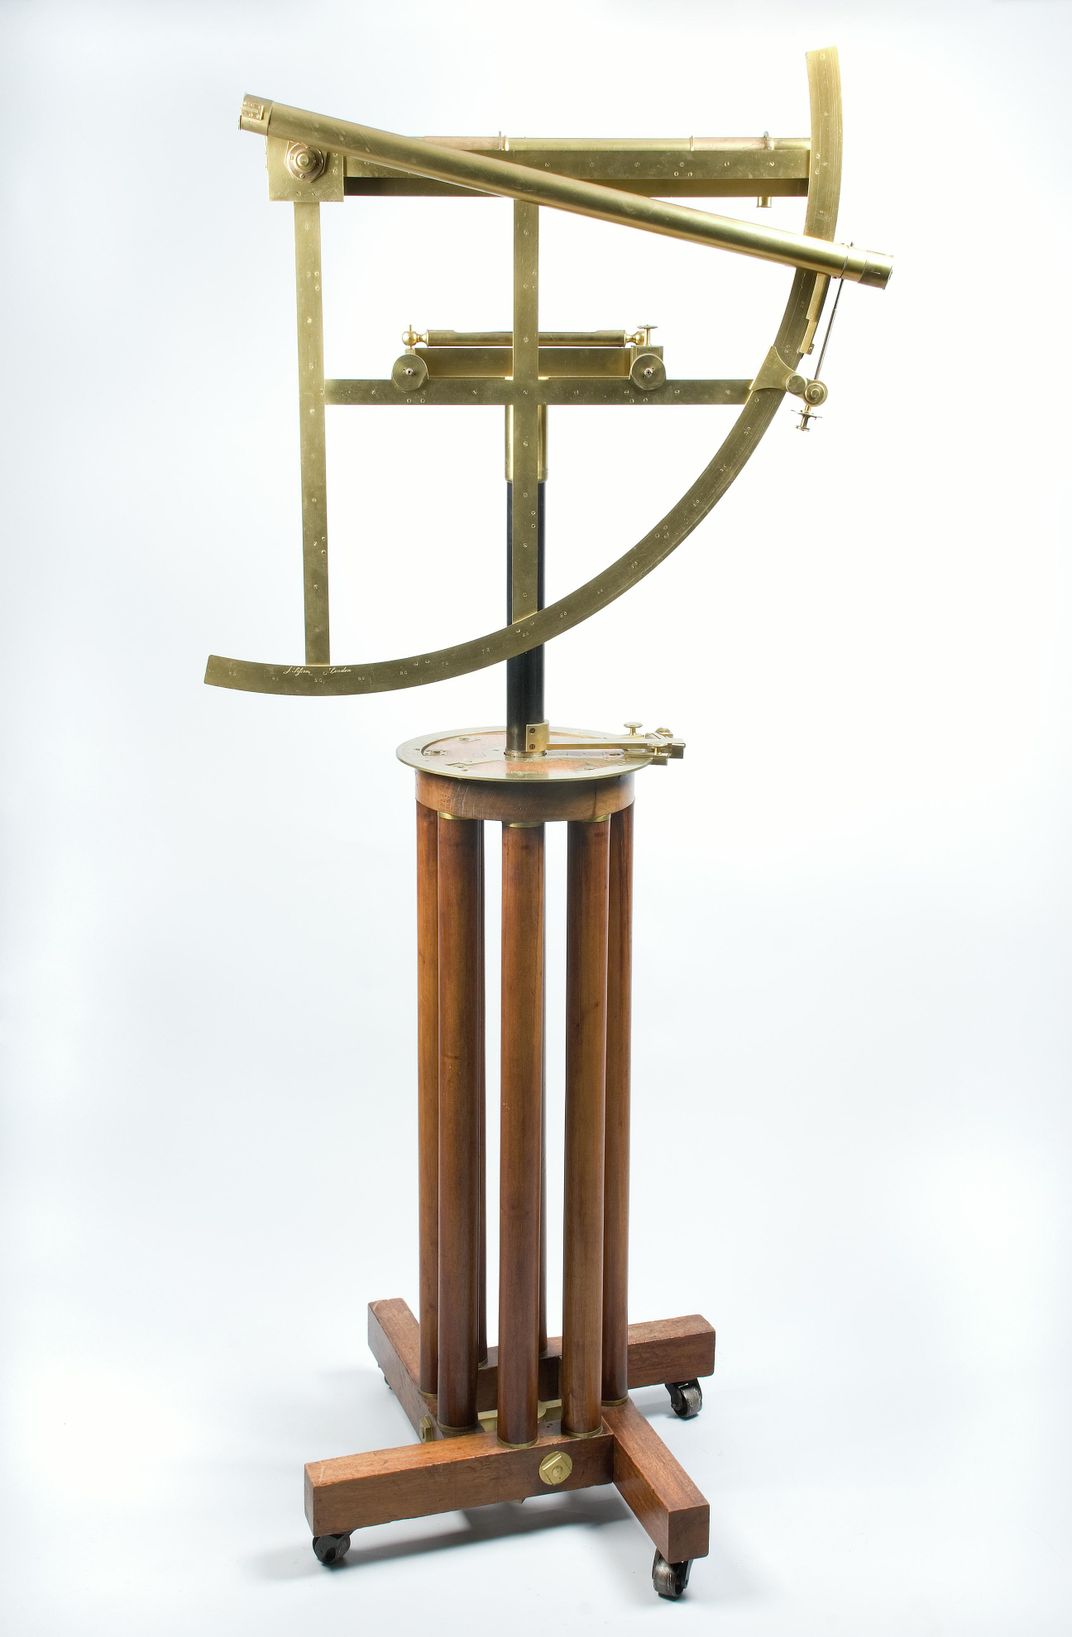 An astronomical quadrant used to measure Earth's magnetic field during Williams' expedition